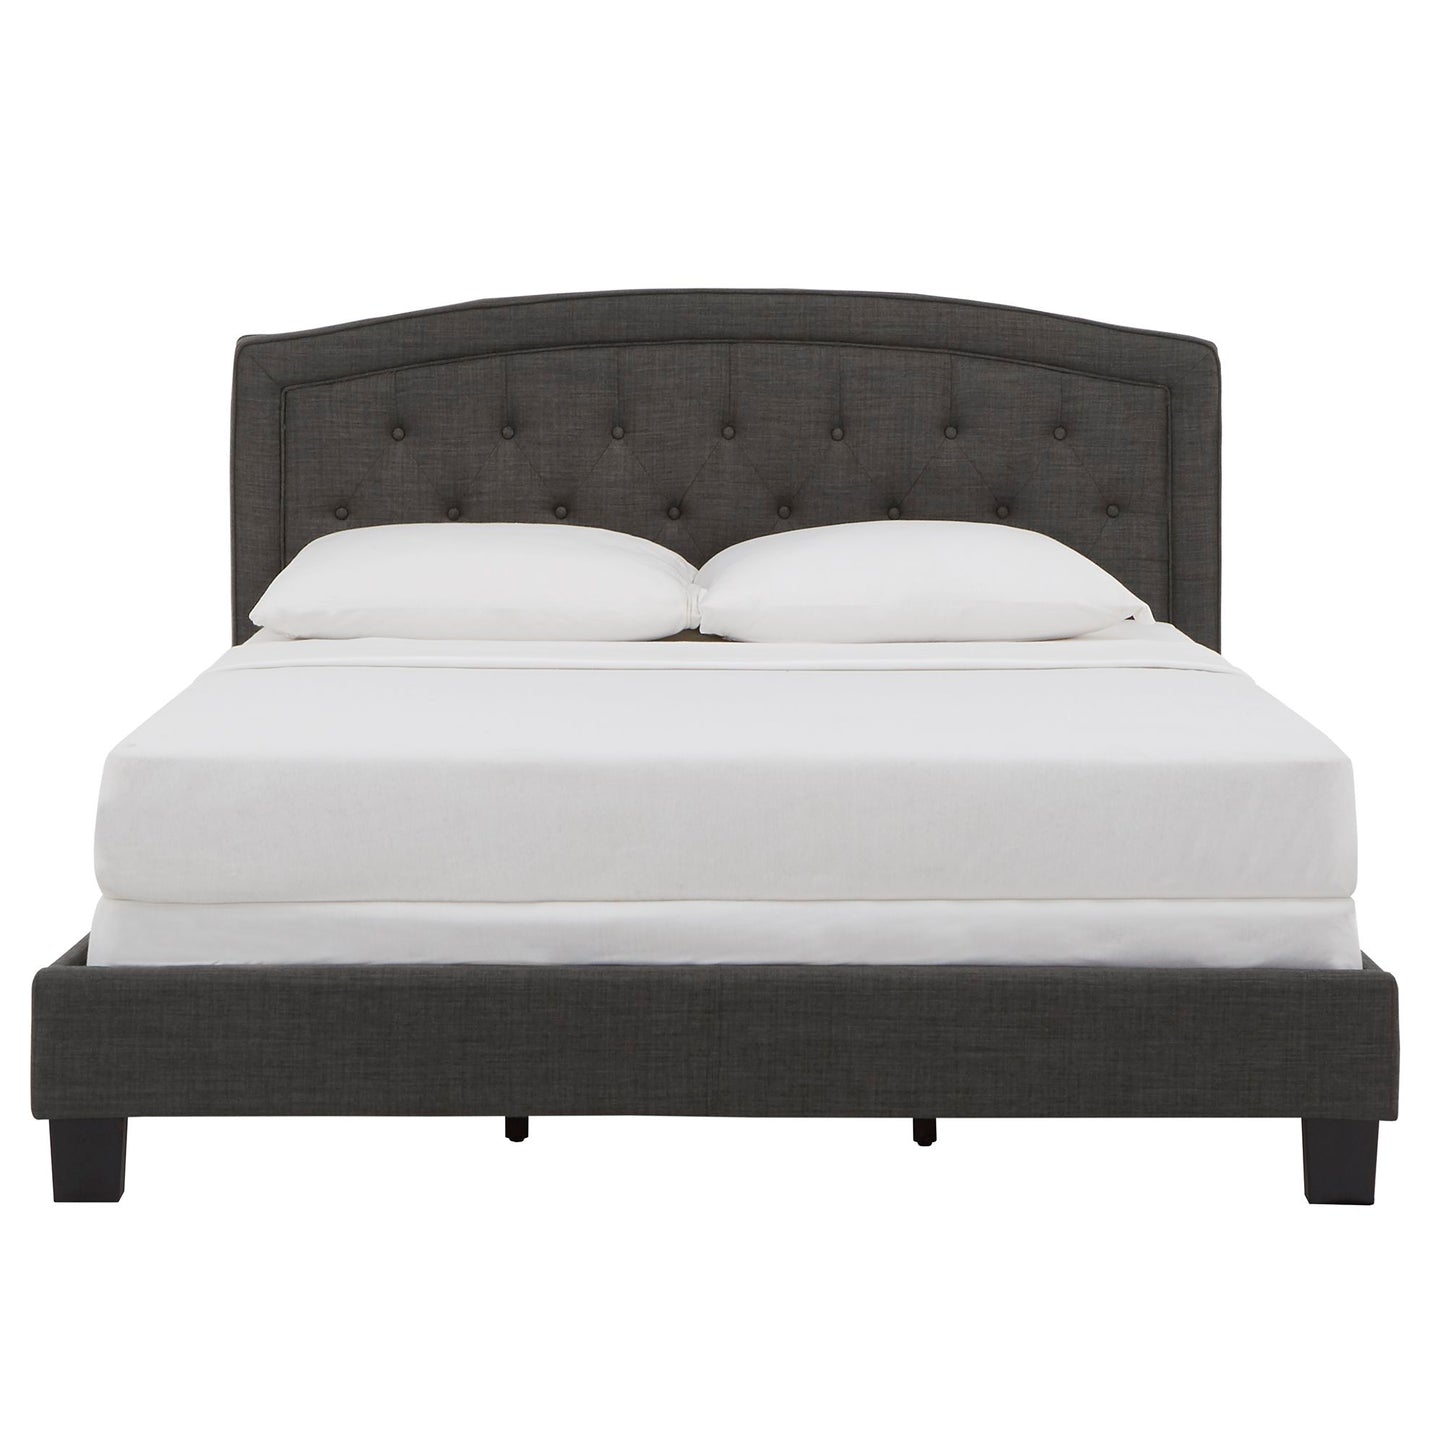 Adjustable Diamond-Tufted Arch-Back Bed - Charcoal, Queen